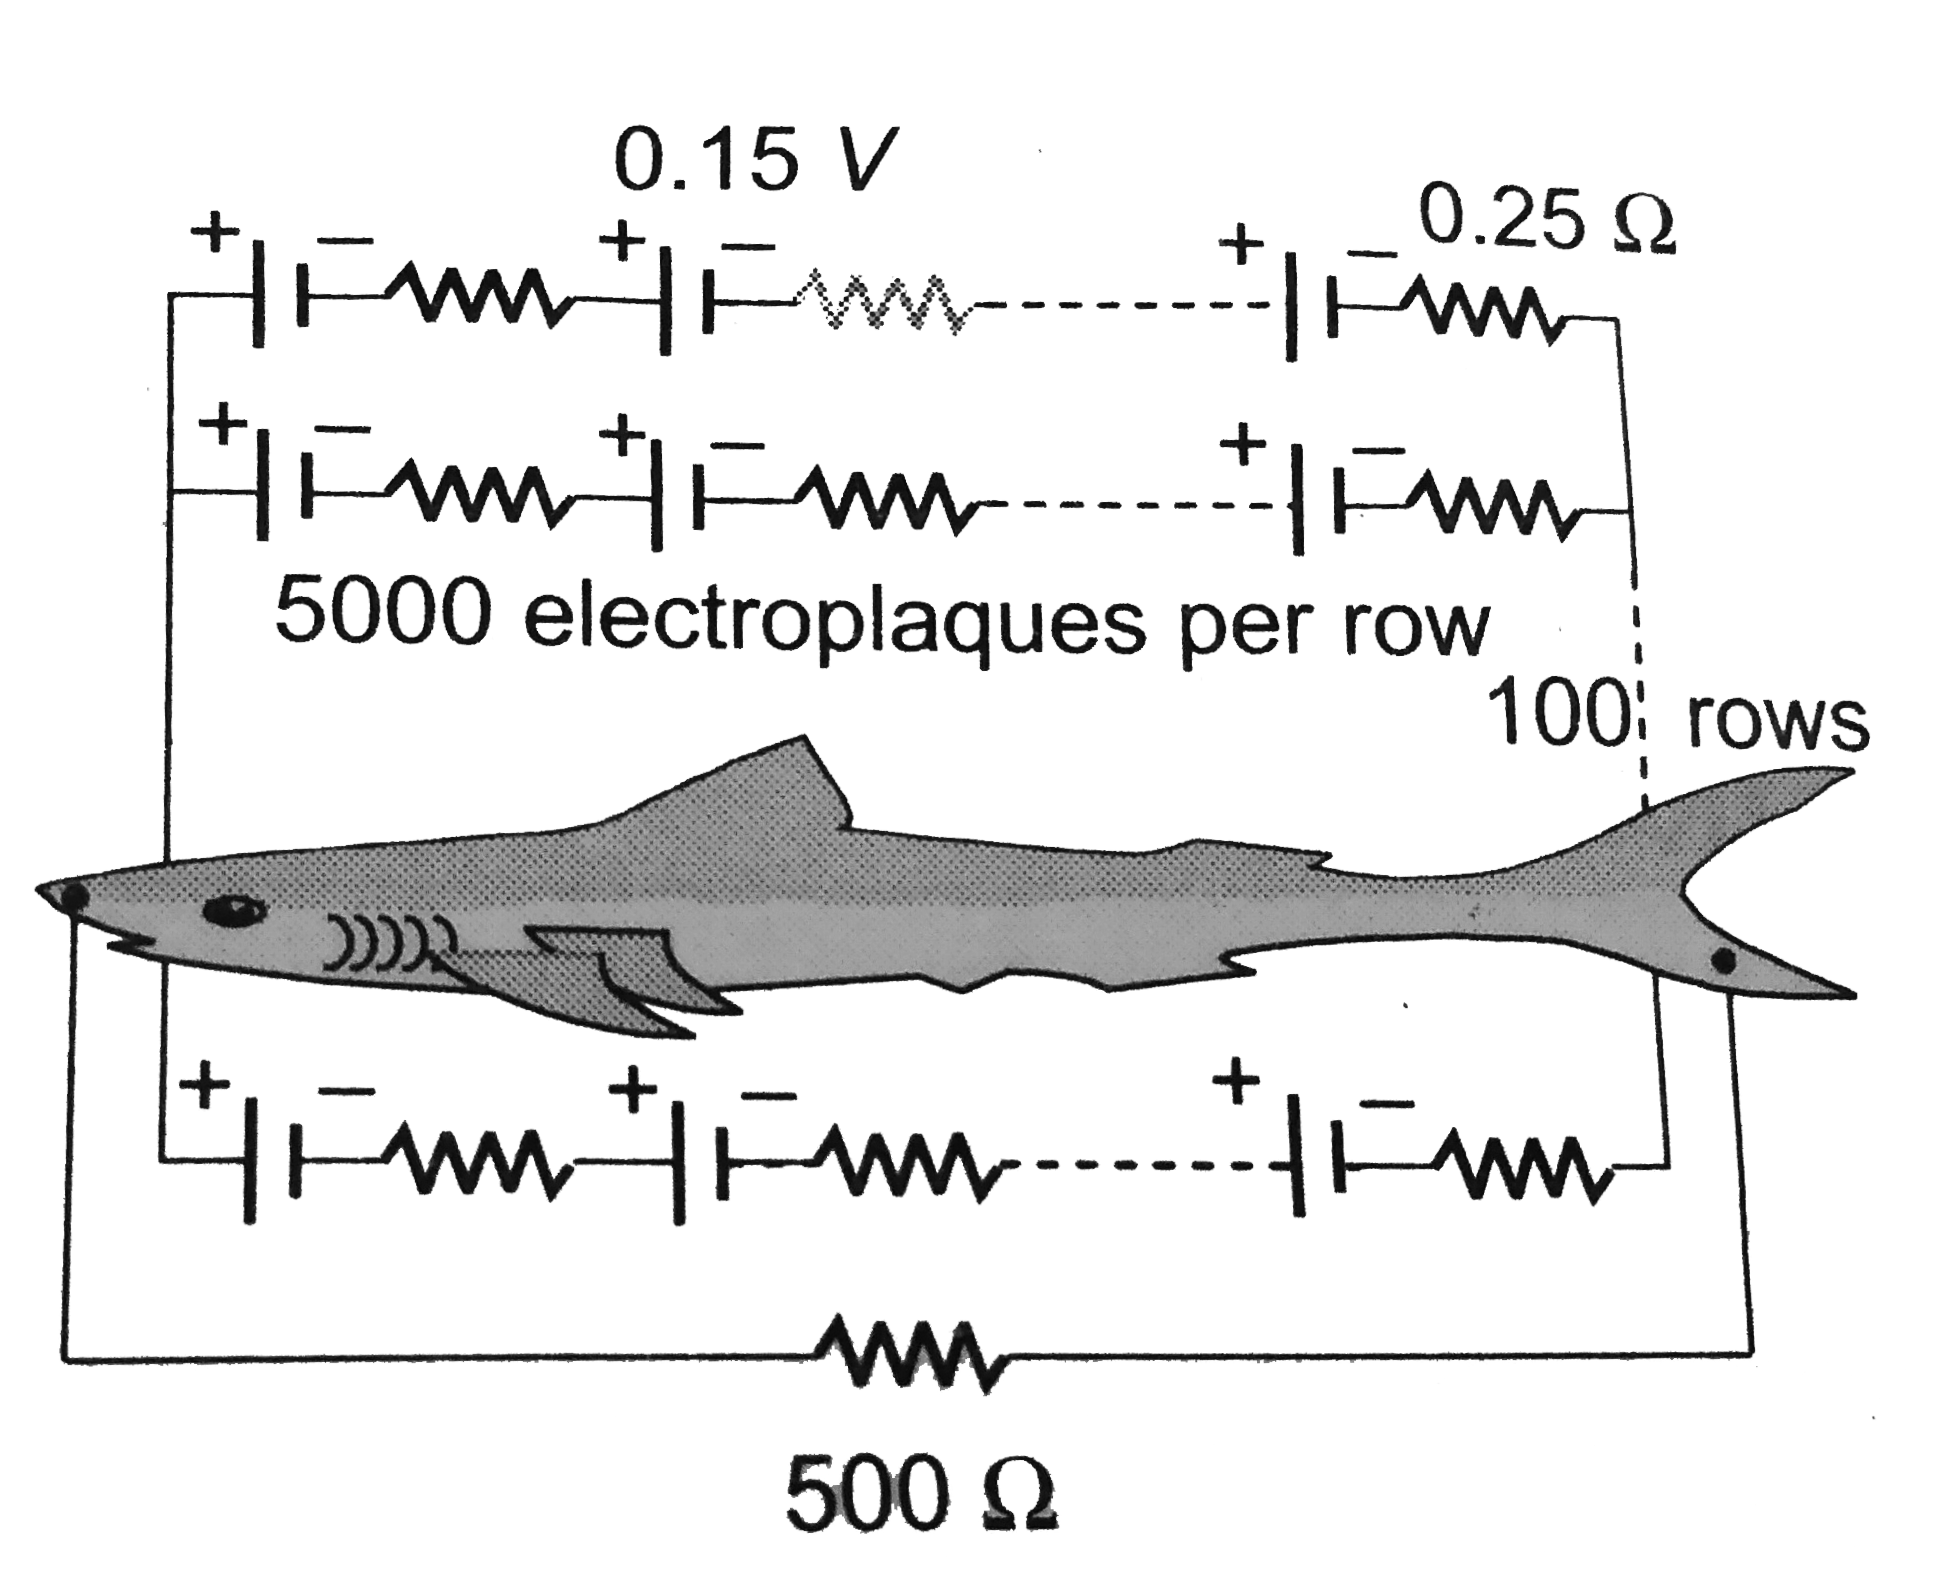 Eels are able to generate current with biological cells called electroplaques. The electroplaques in an eel are arranged in 100 rows, each row stretching horizontally along the body of the fish containing 5000 electroplaques. The arrangment is suggestively shown below. Each electroplaques has an emf of 0.15 V and internal resistance of 0.25 Omega   The water surrounding theeel completes a cricuit be ween the head and its tail. If the water surrounding it has a resistance of 500 Omega, the current an eel can produce in water is about